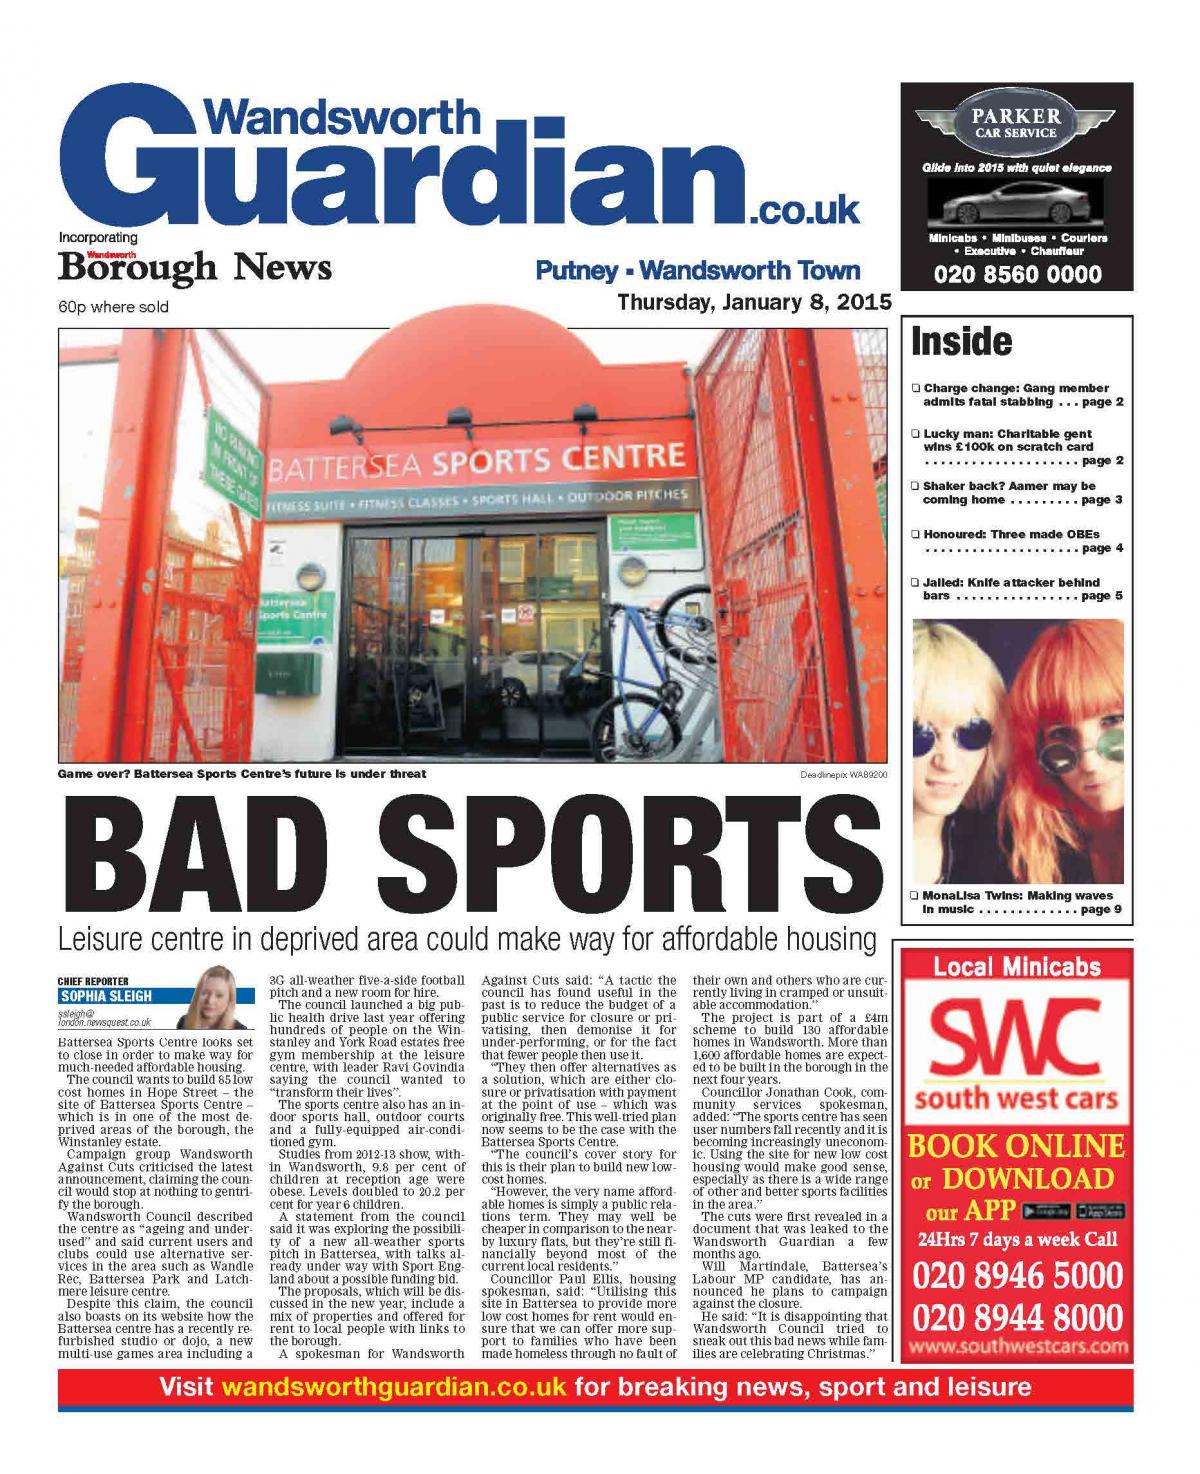 Wandsworth Guardian front pages 2015